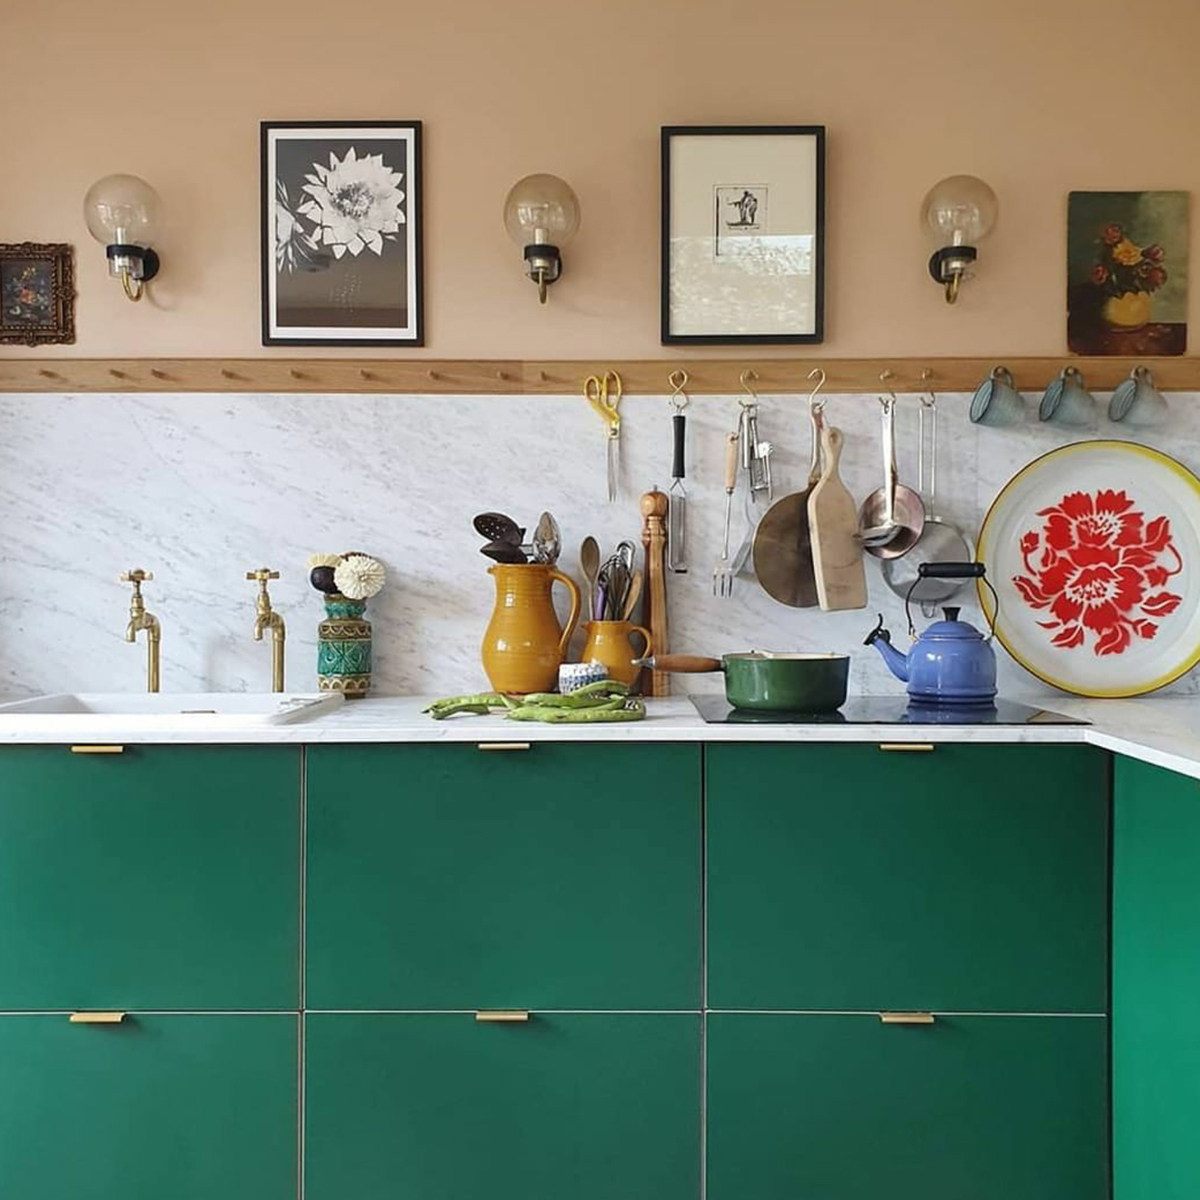 An instant update to the Ikea kitchen - Plykea supply plywood doors and worktops for Ikea kitchens and these bold green doors sit perfectly with the peach walls. For a practical touch a handy peg rail is used for a variety of utensils. #plykeakitchens #colourfulkitchens #sophierobinson